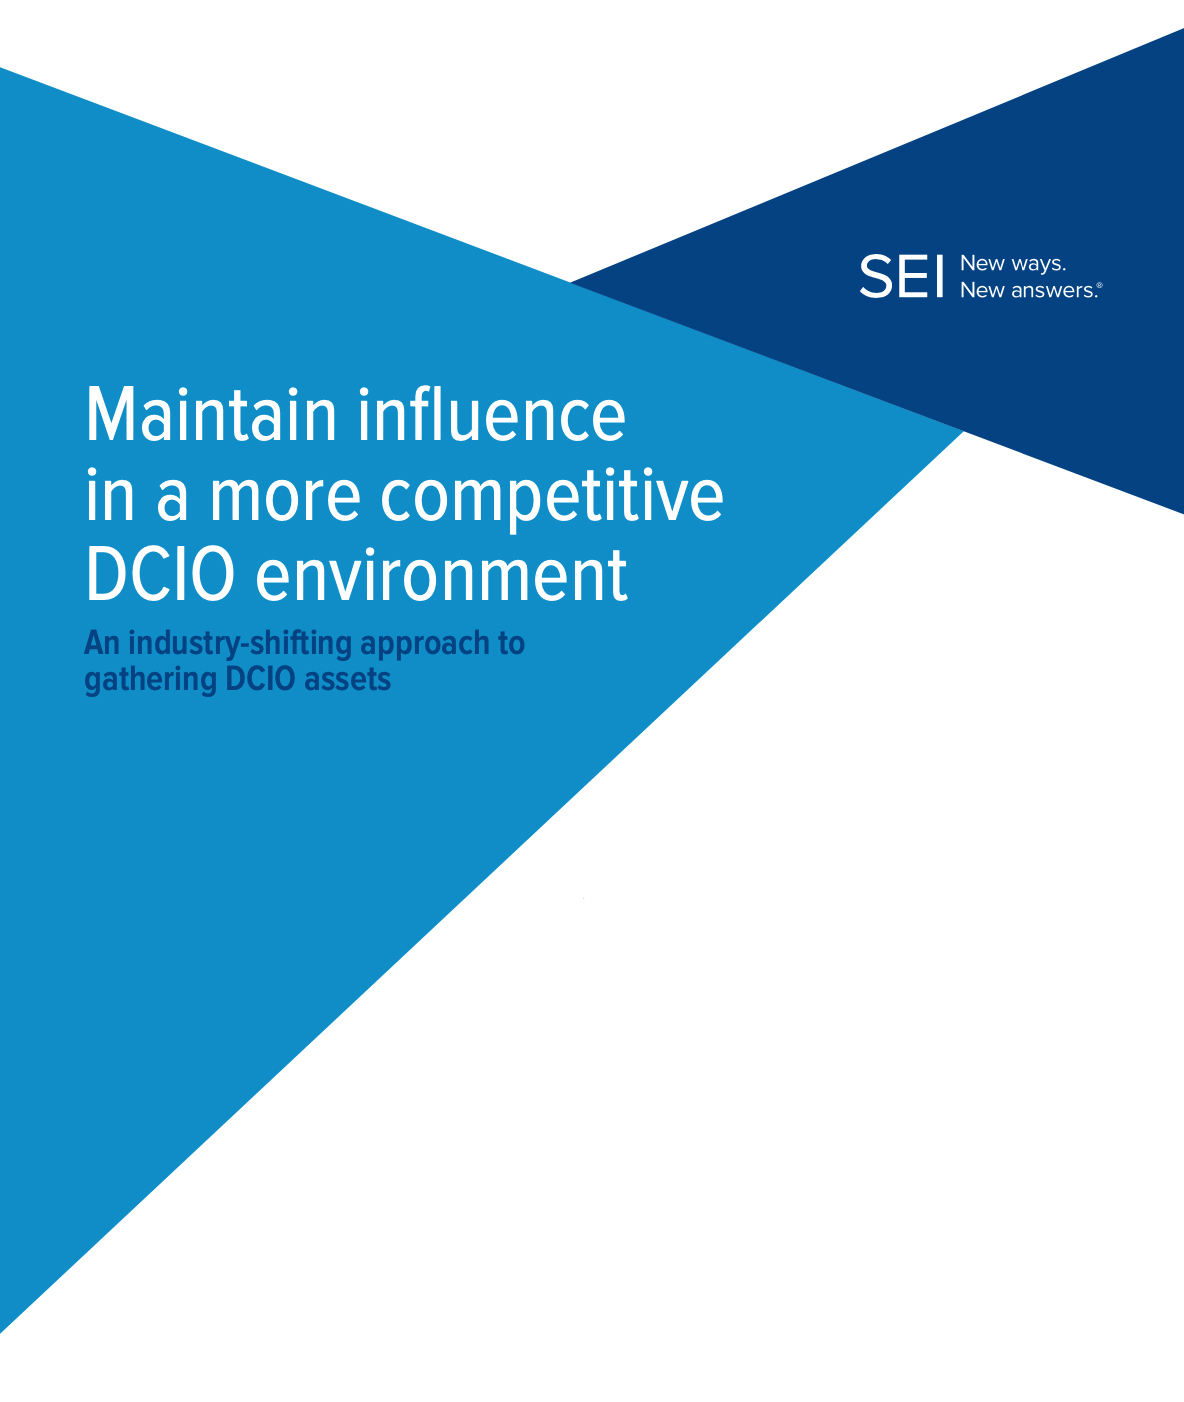 Maintain influence in a more competitive DCIO environment - An industry-shifting approach to gathering DCIO assets